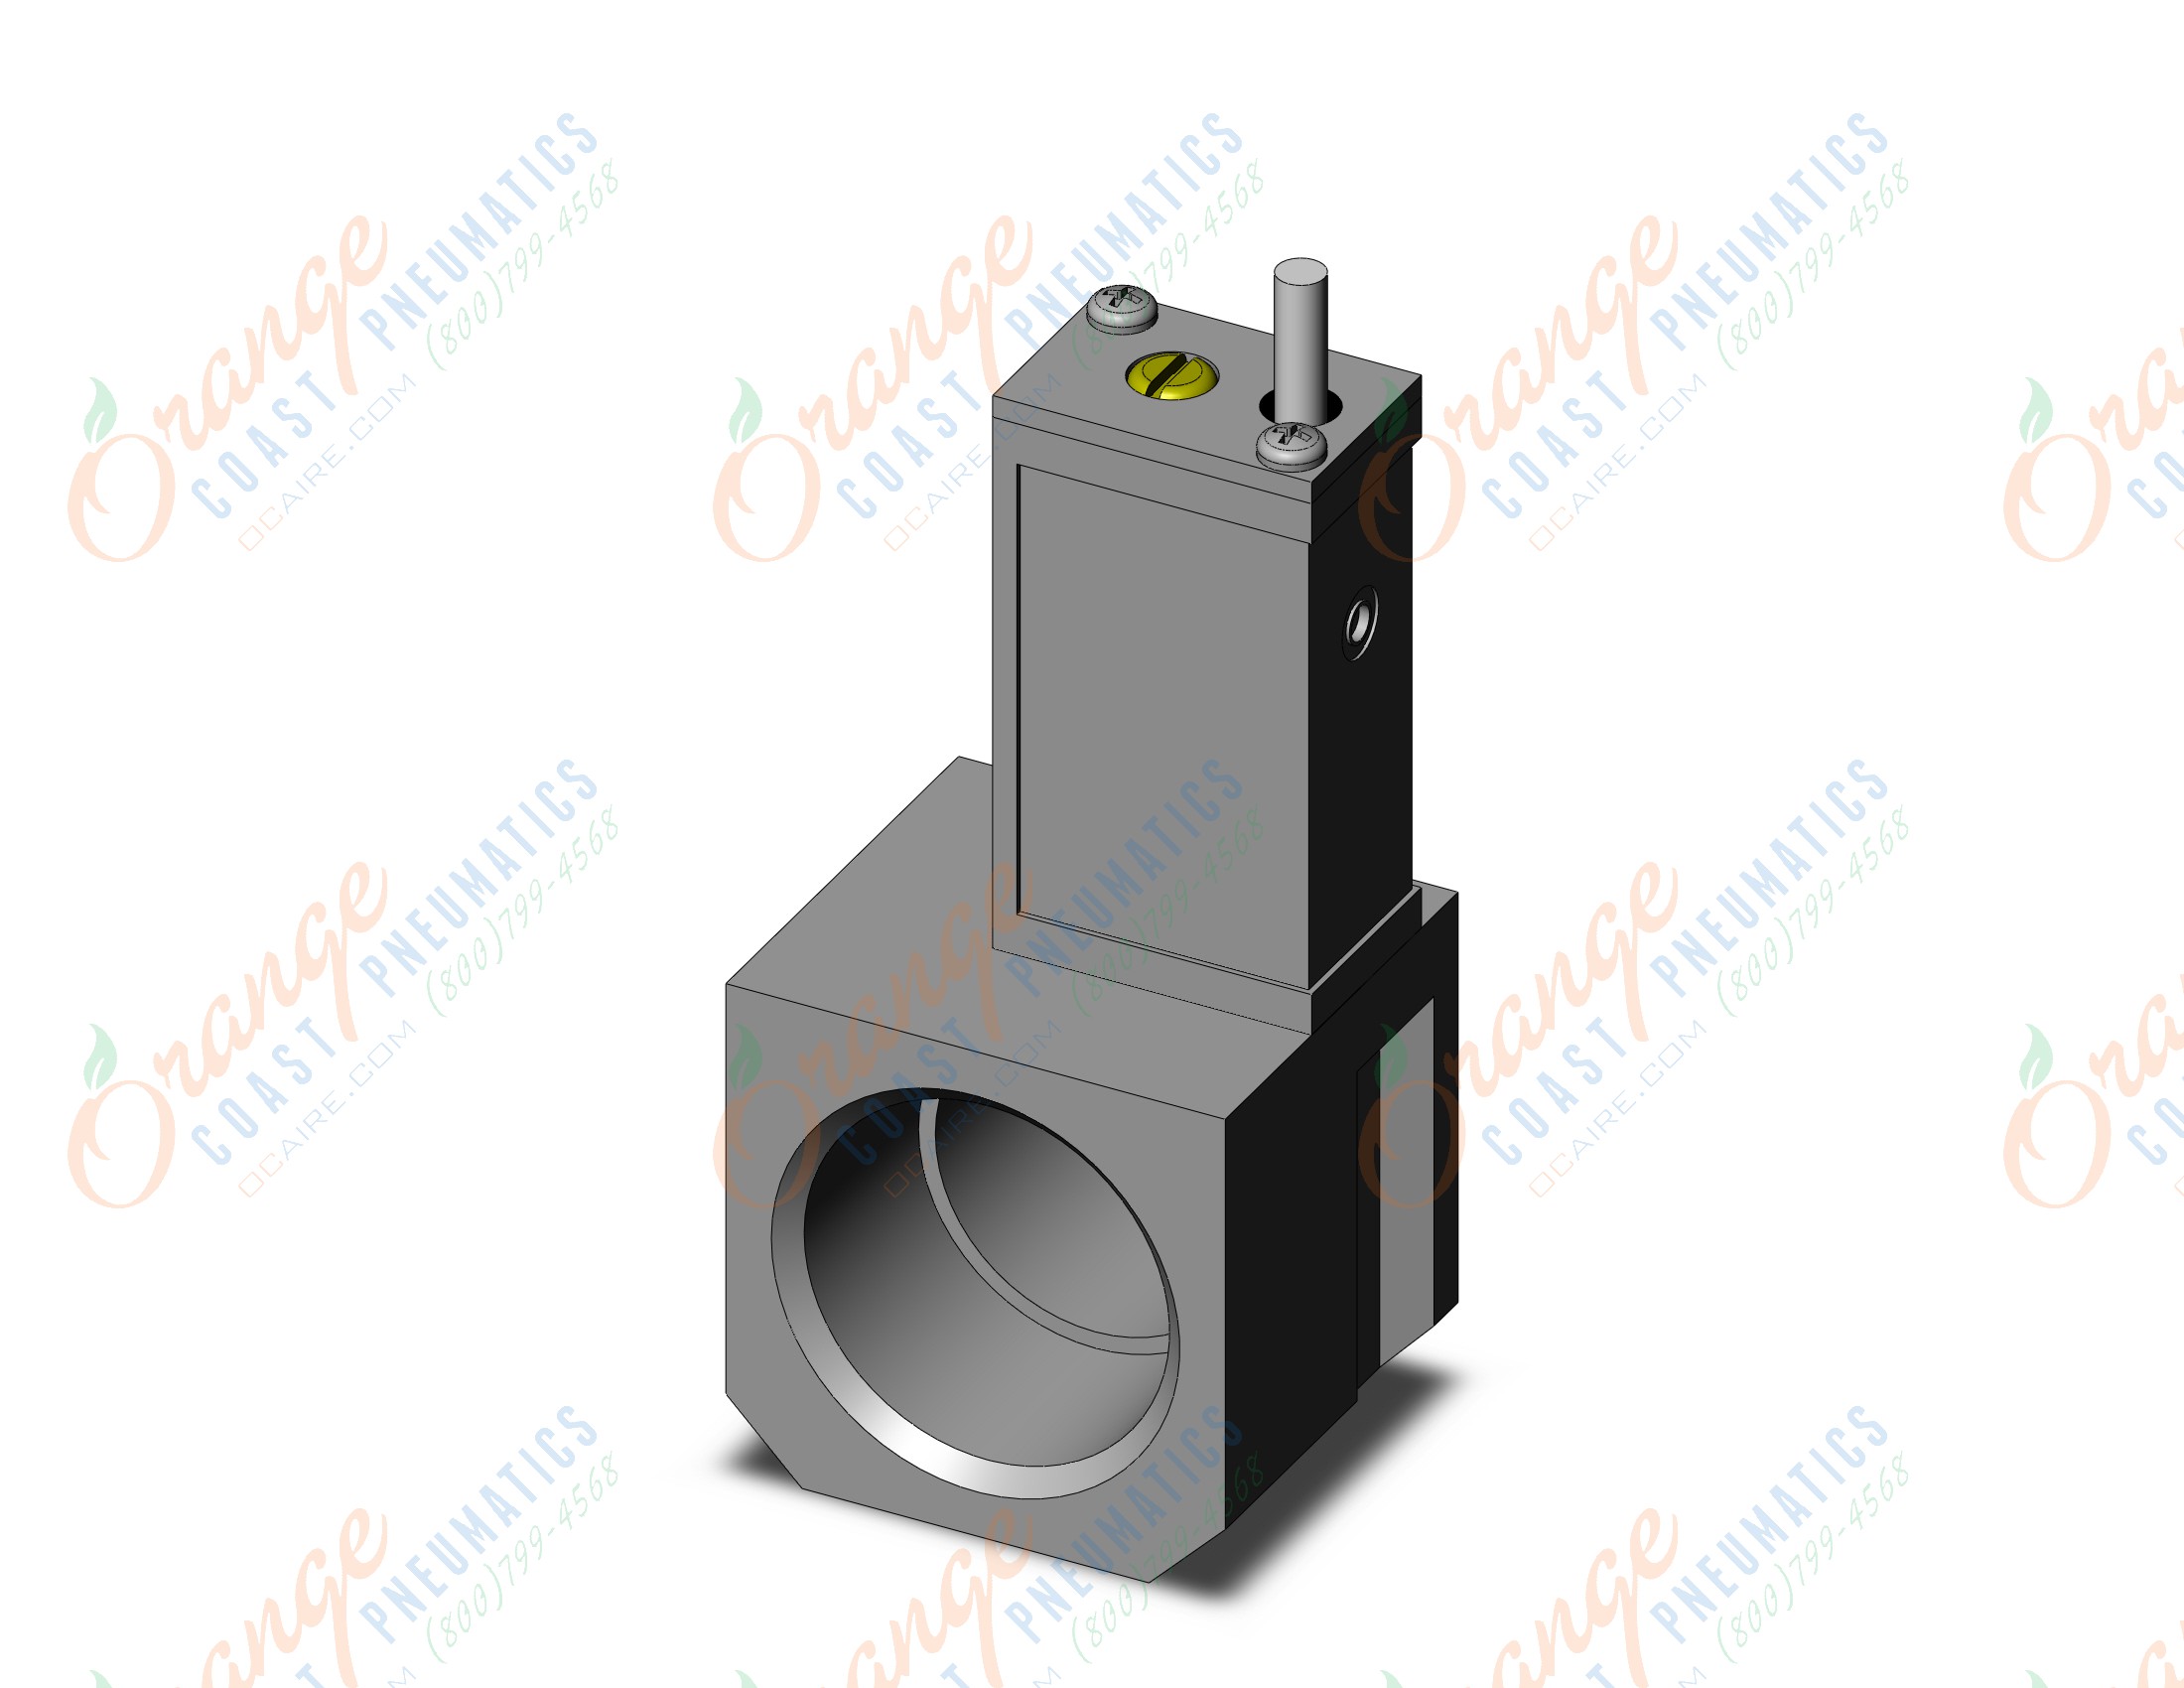 SMC IS10E-4006-Z-A pressure switch w/piping adapter, PRESSURE SWITCH, IS ISG